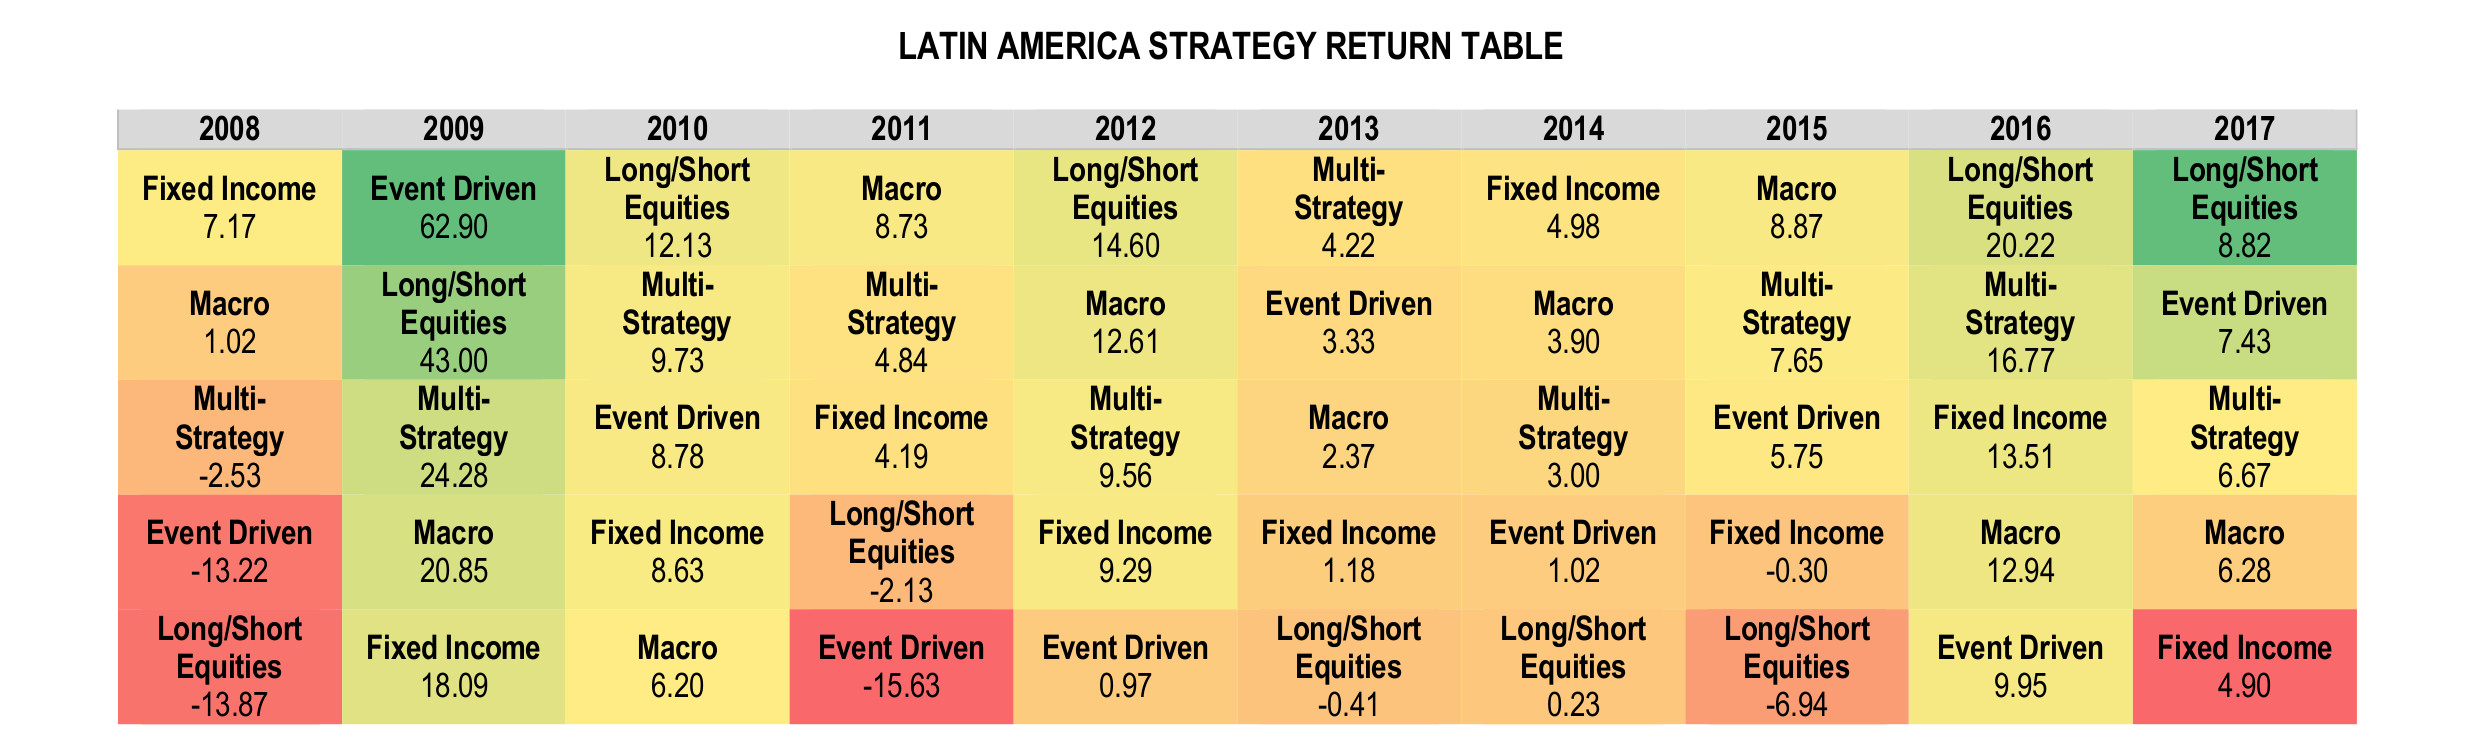 Latin American Hedge Fund Infographic June 2017 Strategy Return